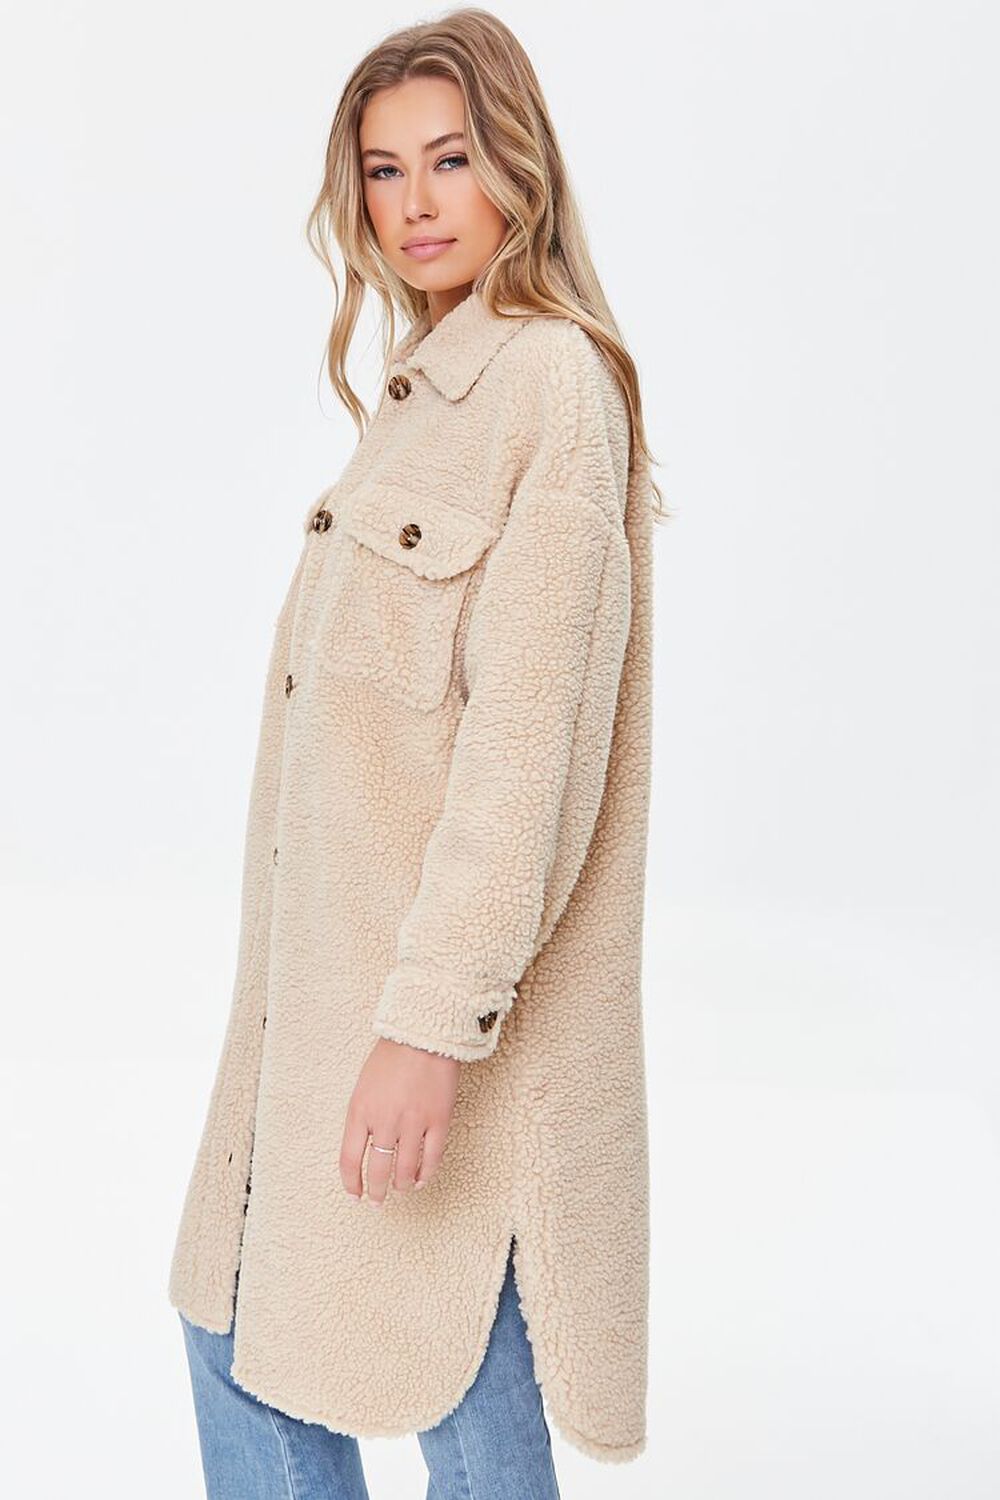 TAUPE Faux Shearling Longline Coat, image 2